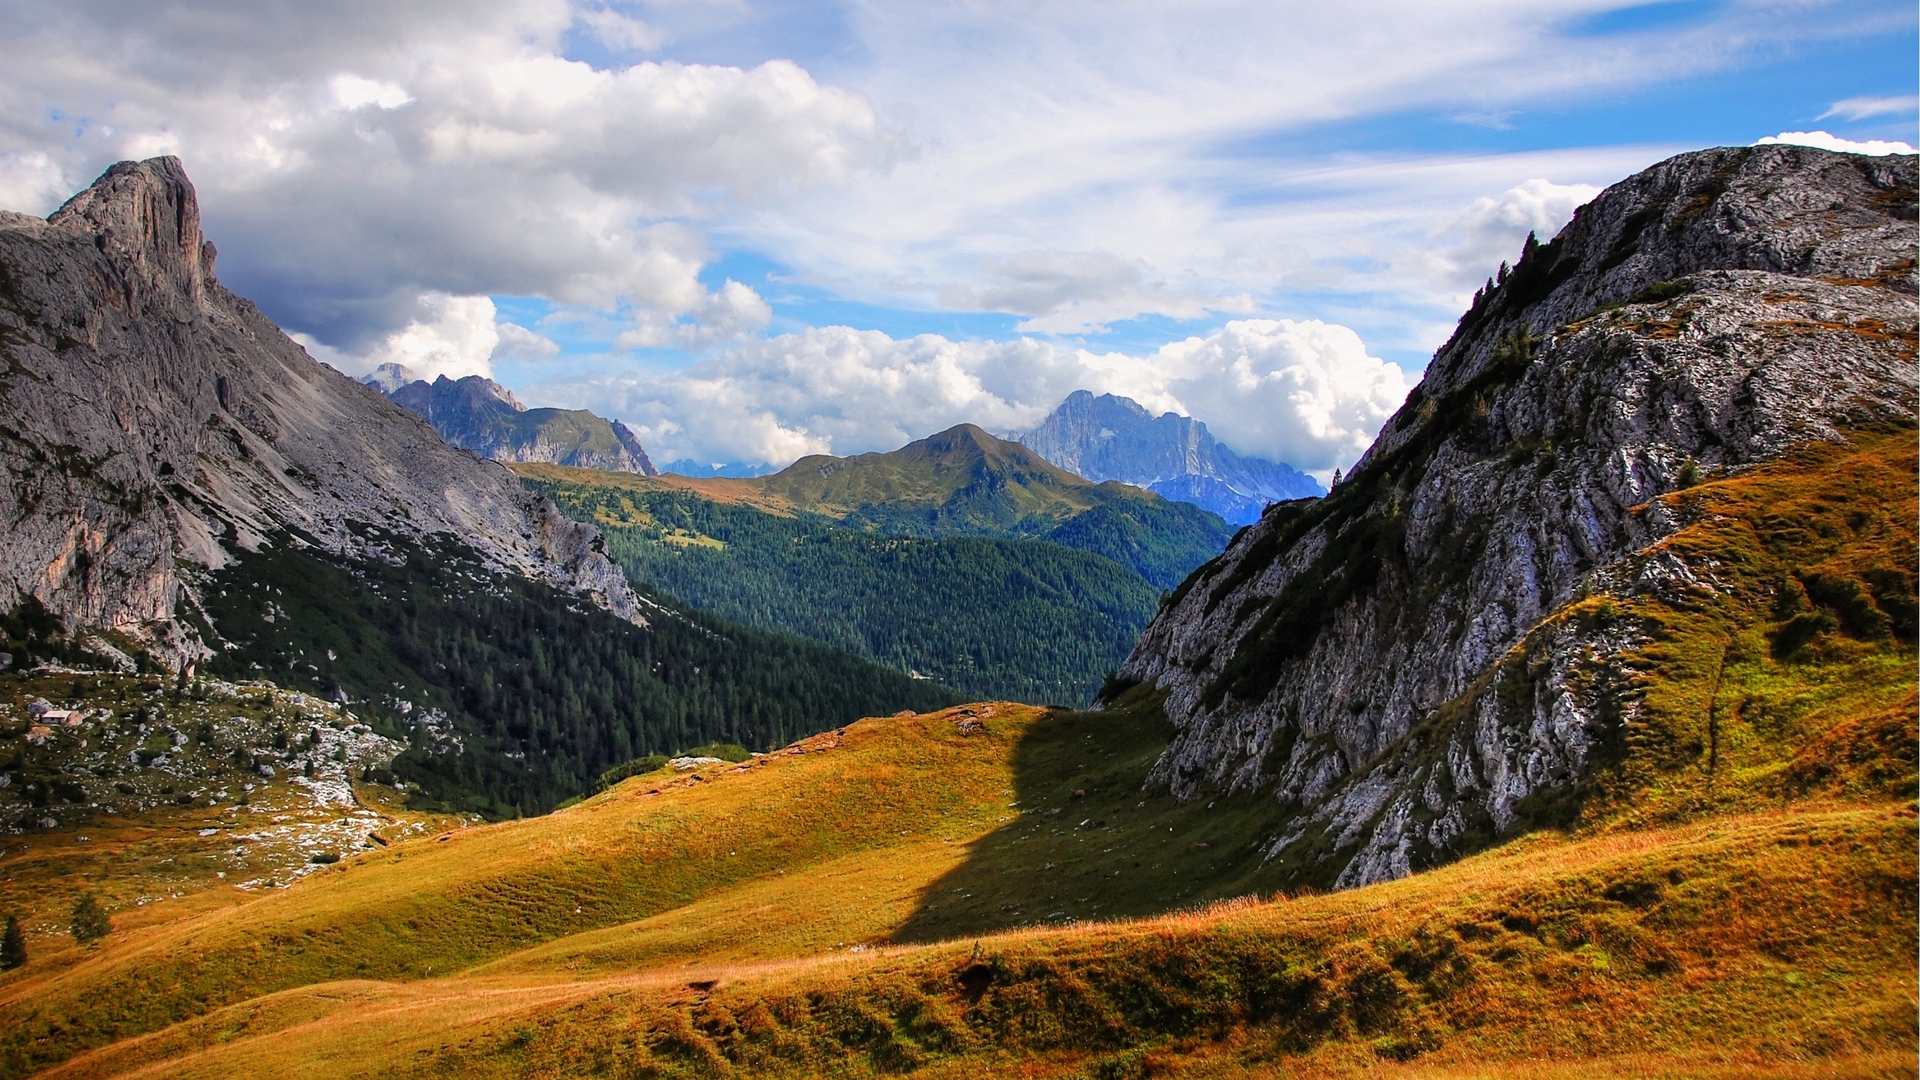 Download wallpaper 1920x1080 mountains, dolomites, italy, south